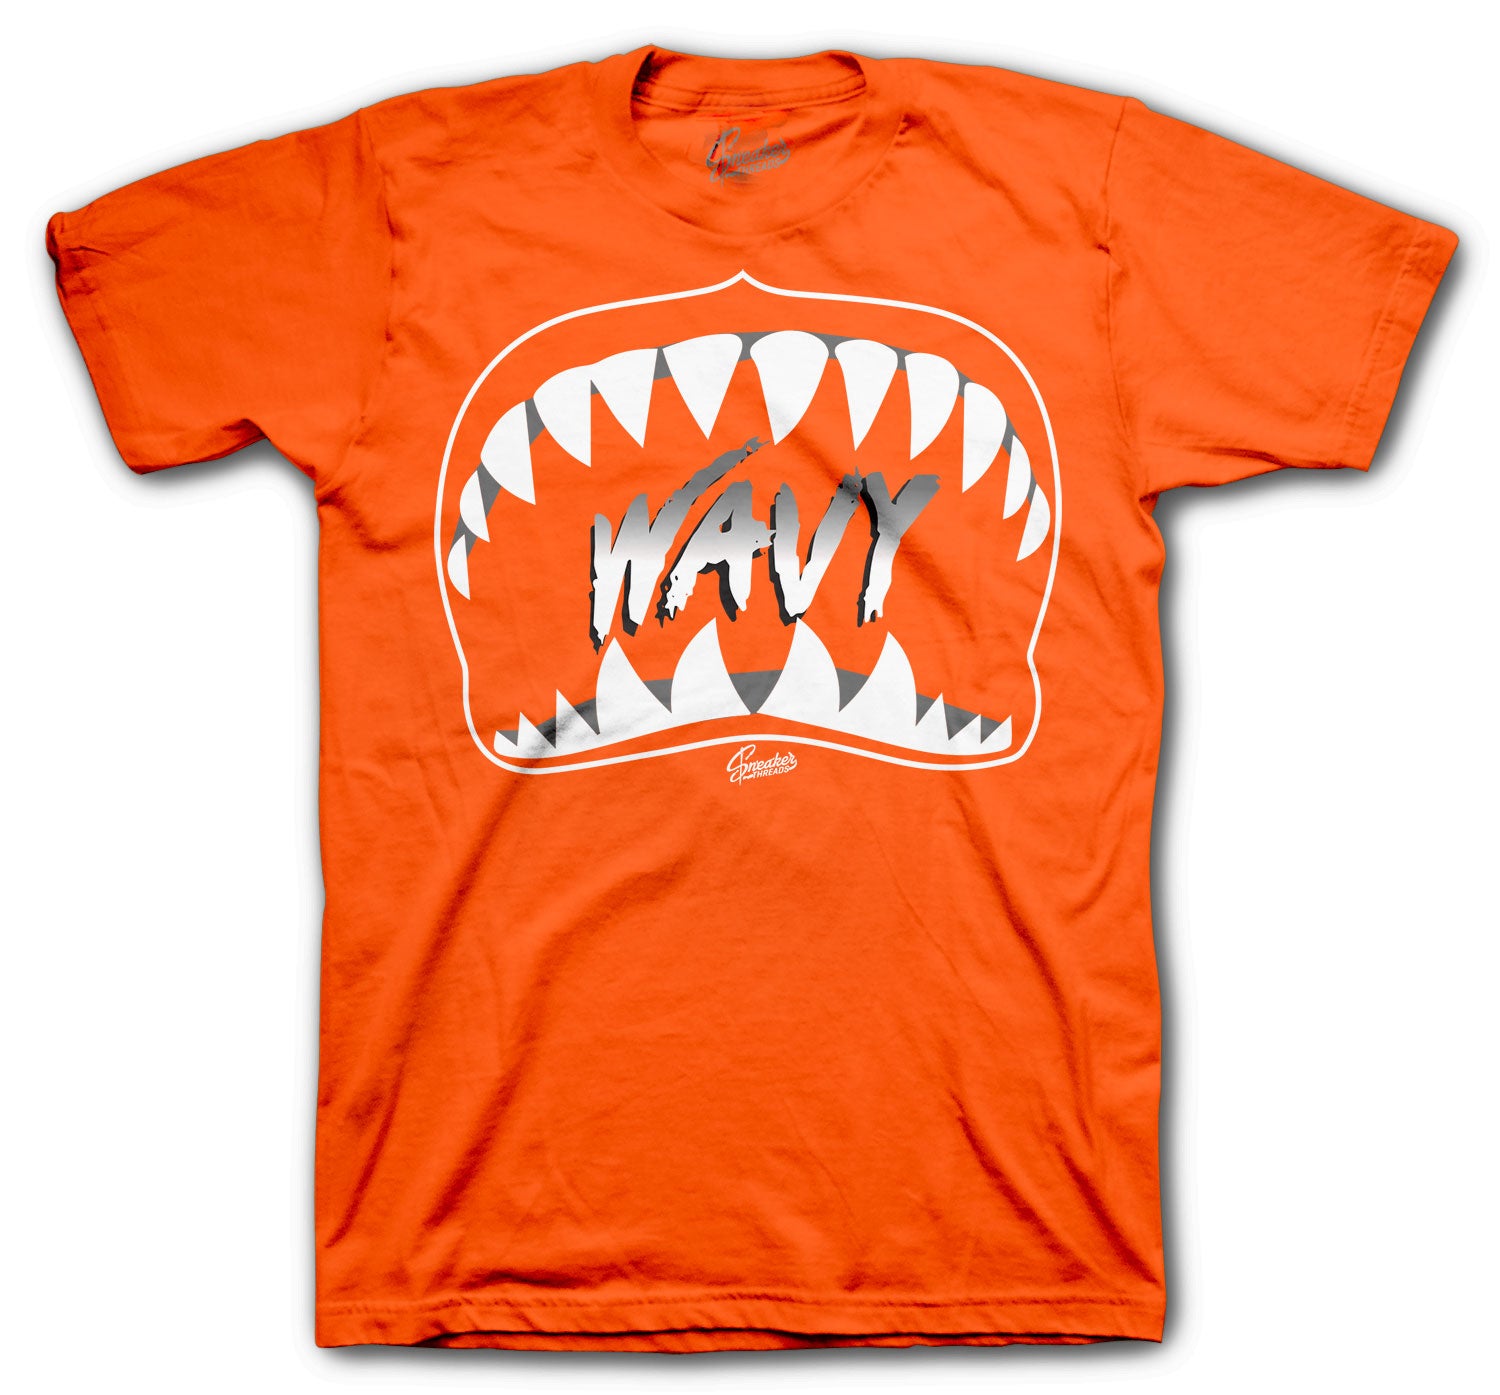 T shirt collection matches with sneaker collection Jordan  4 Metallic Orange Sneaker collection 